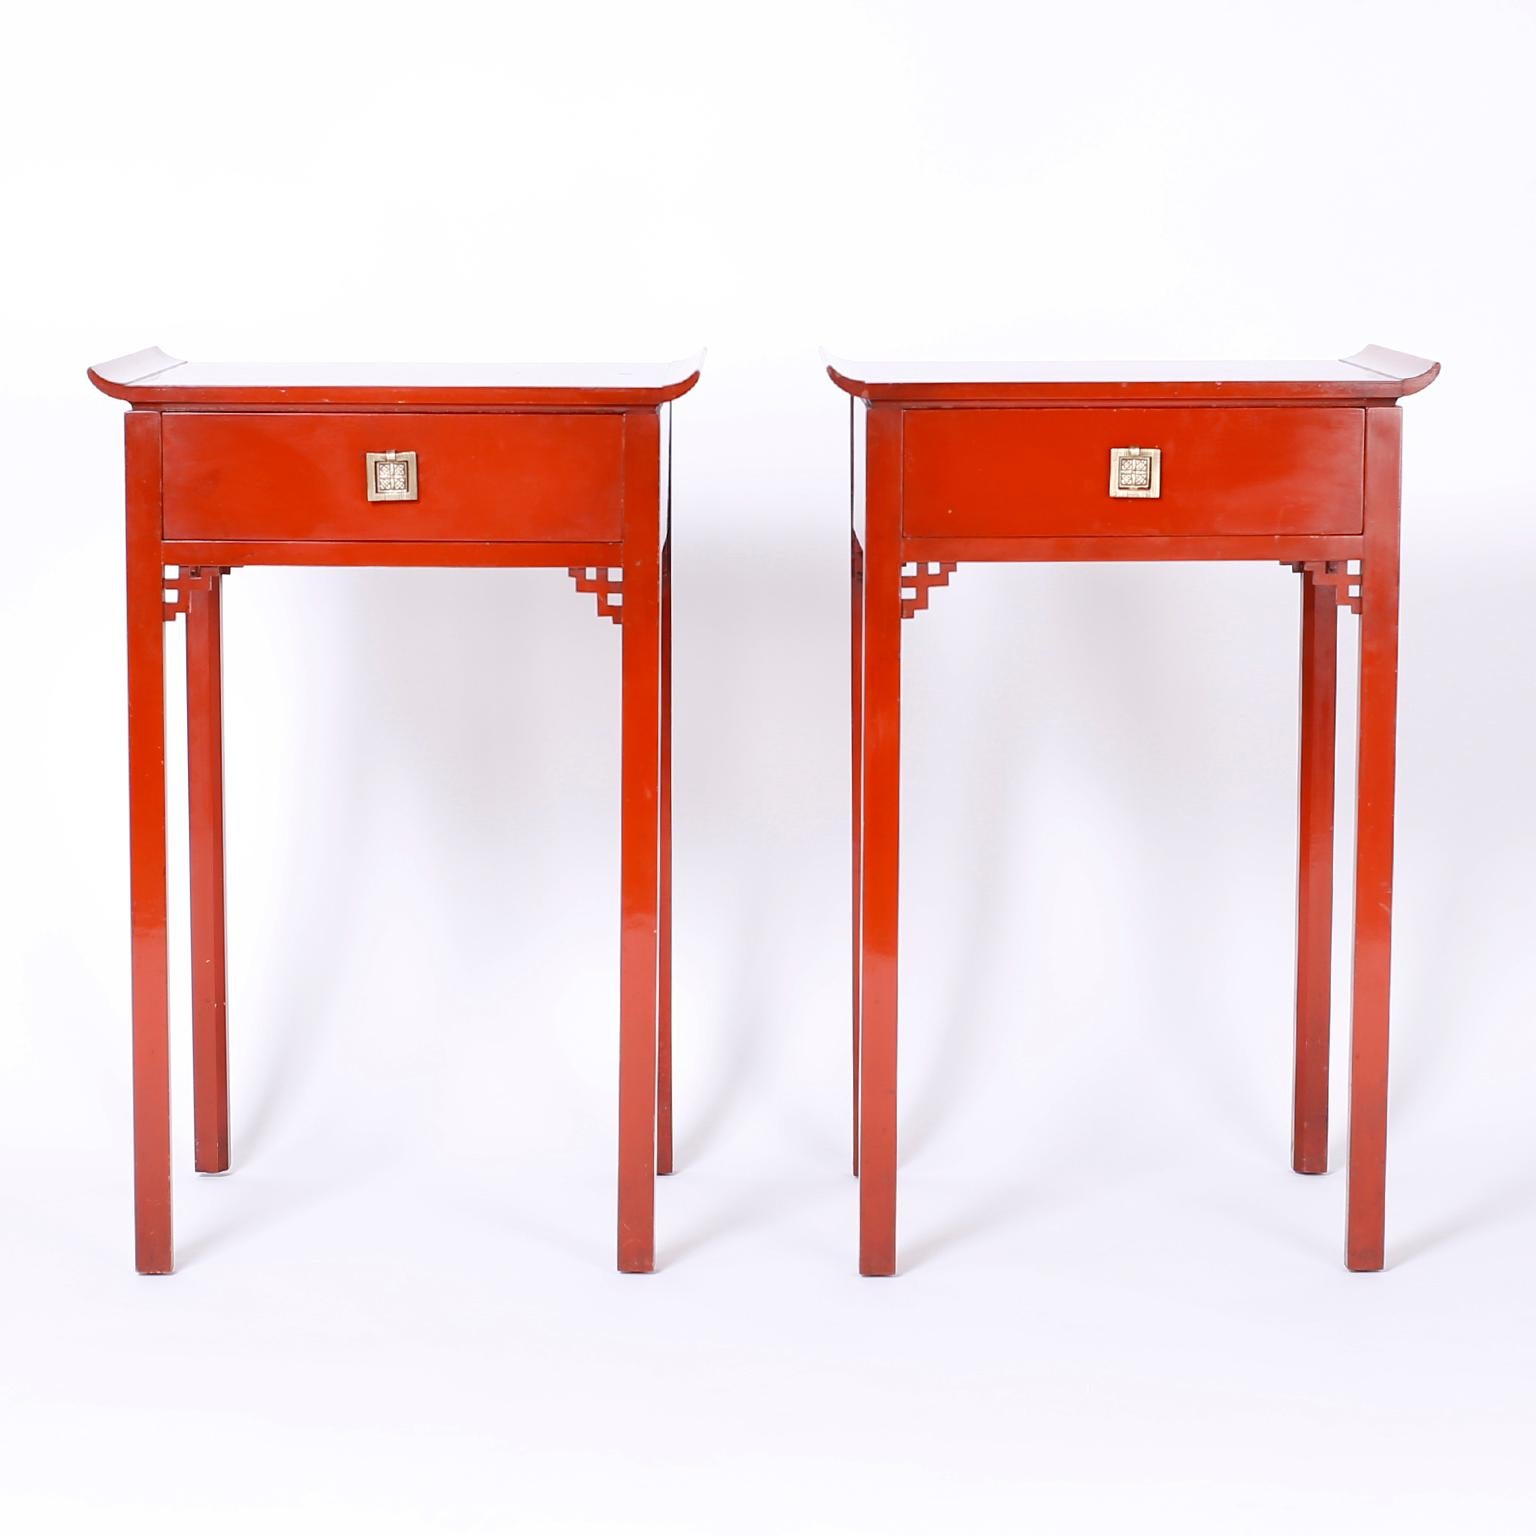 Pair of pagoda stands or tables lacquered in a distinctive Chinese red featuring tops decorated with hand painted chinoiserie scenes, Ming style brass hardware, Asian brackets and long elegant legs.